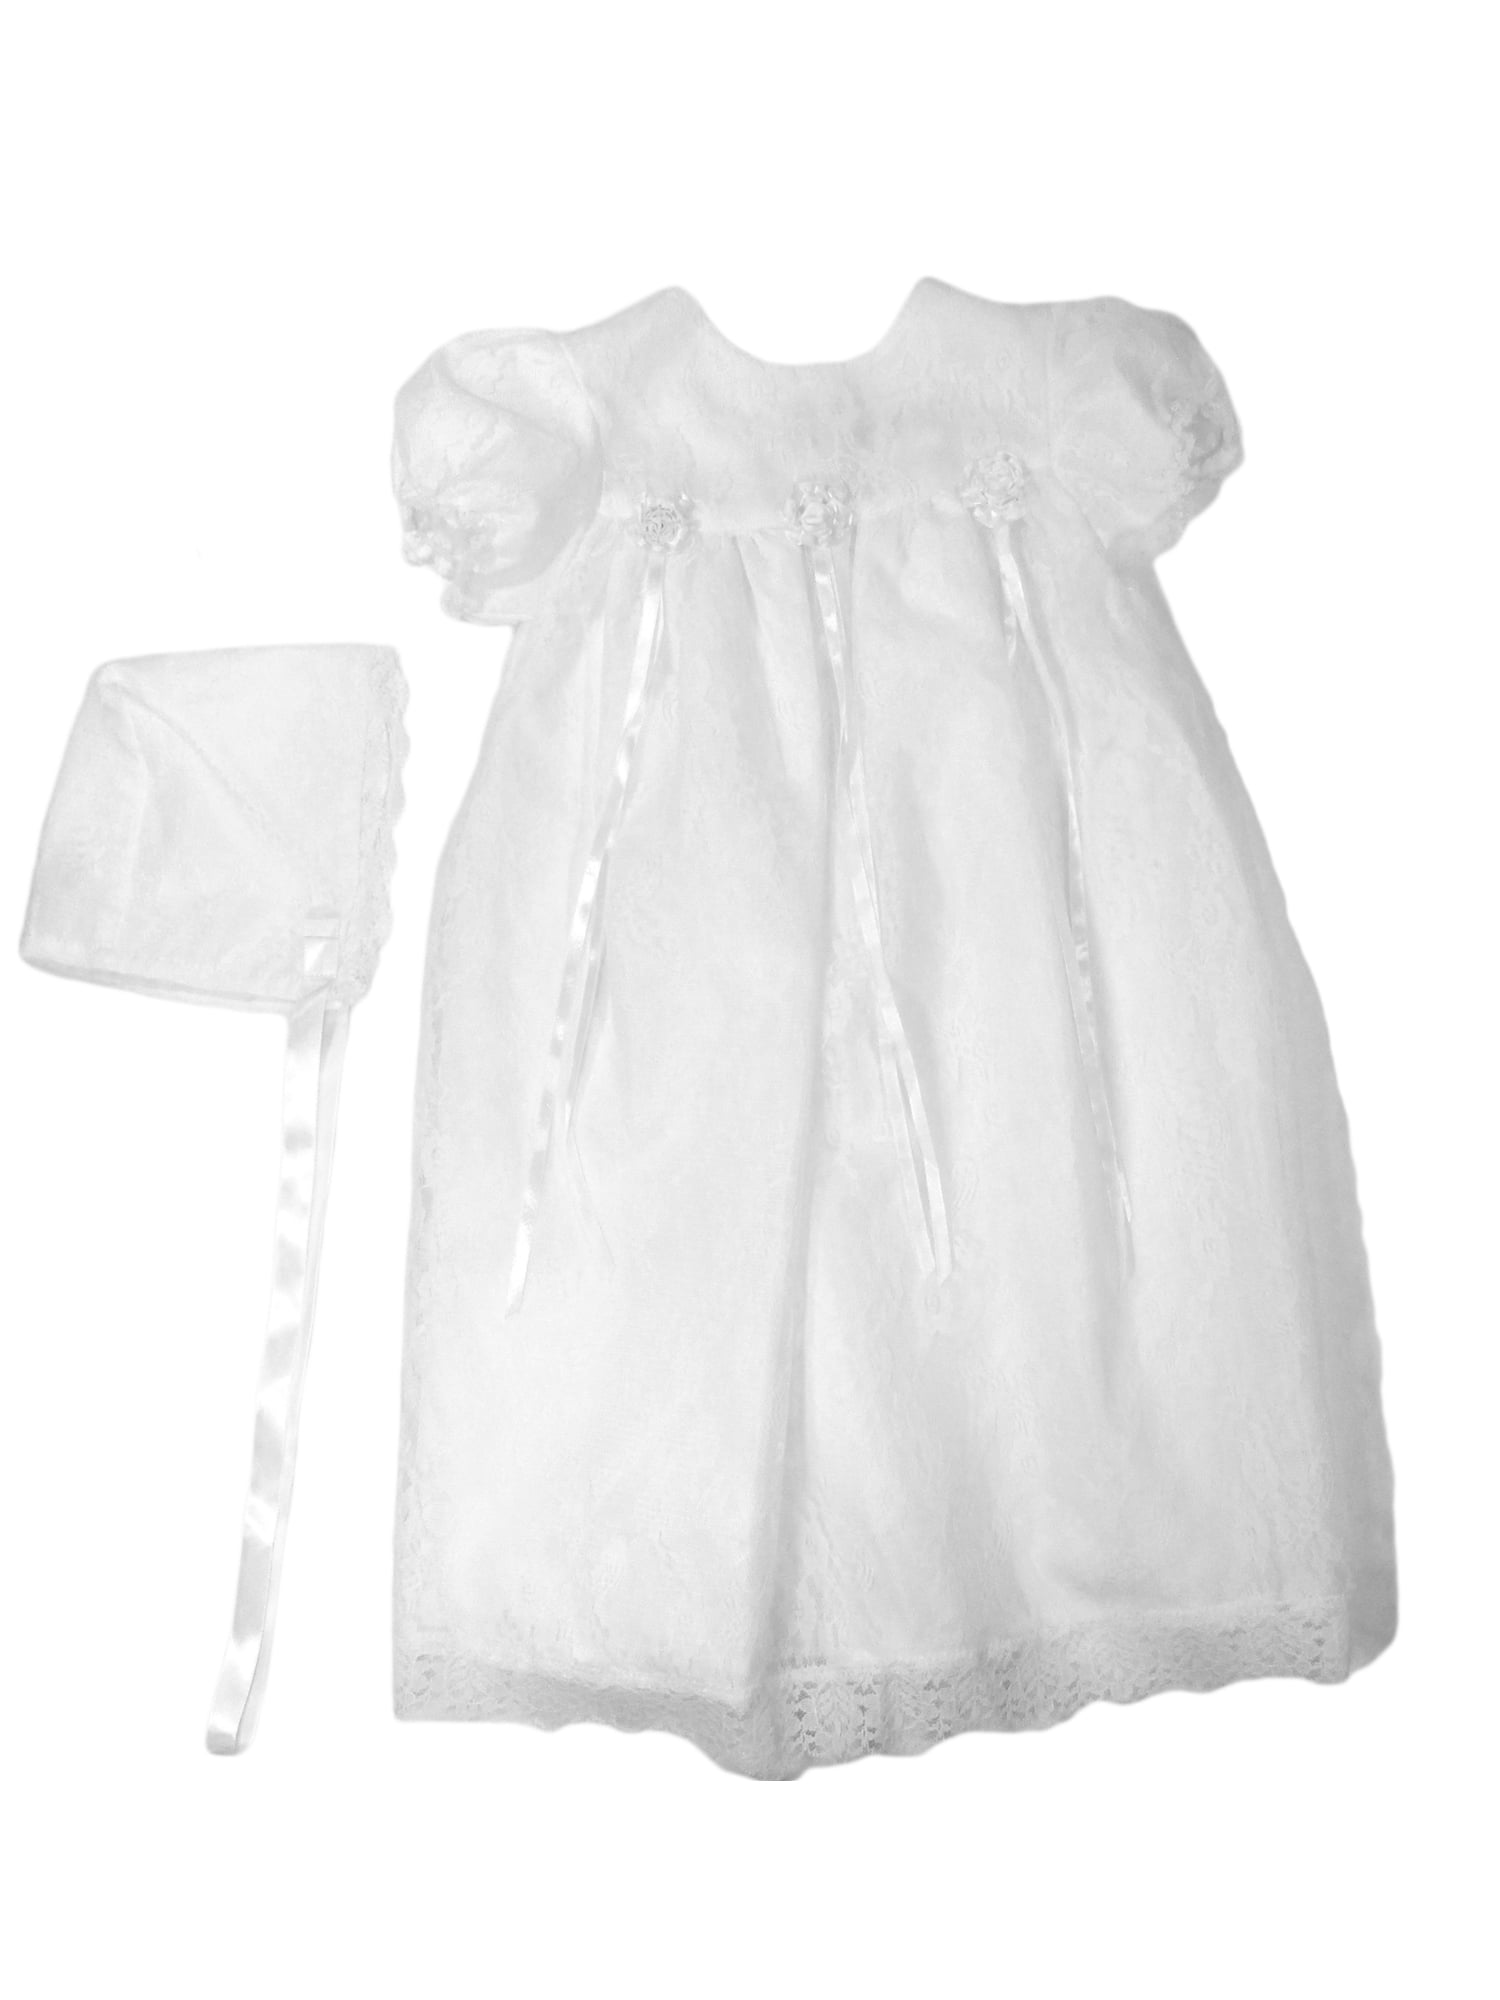 next christening outfits